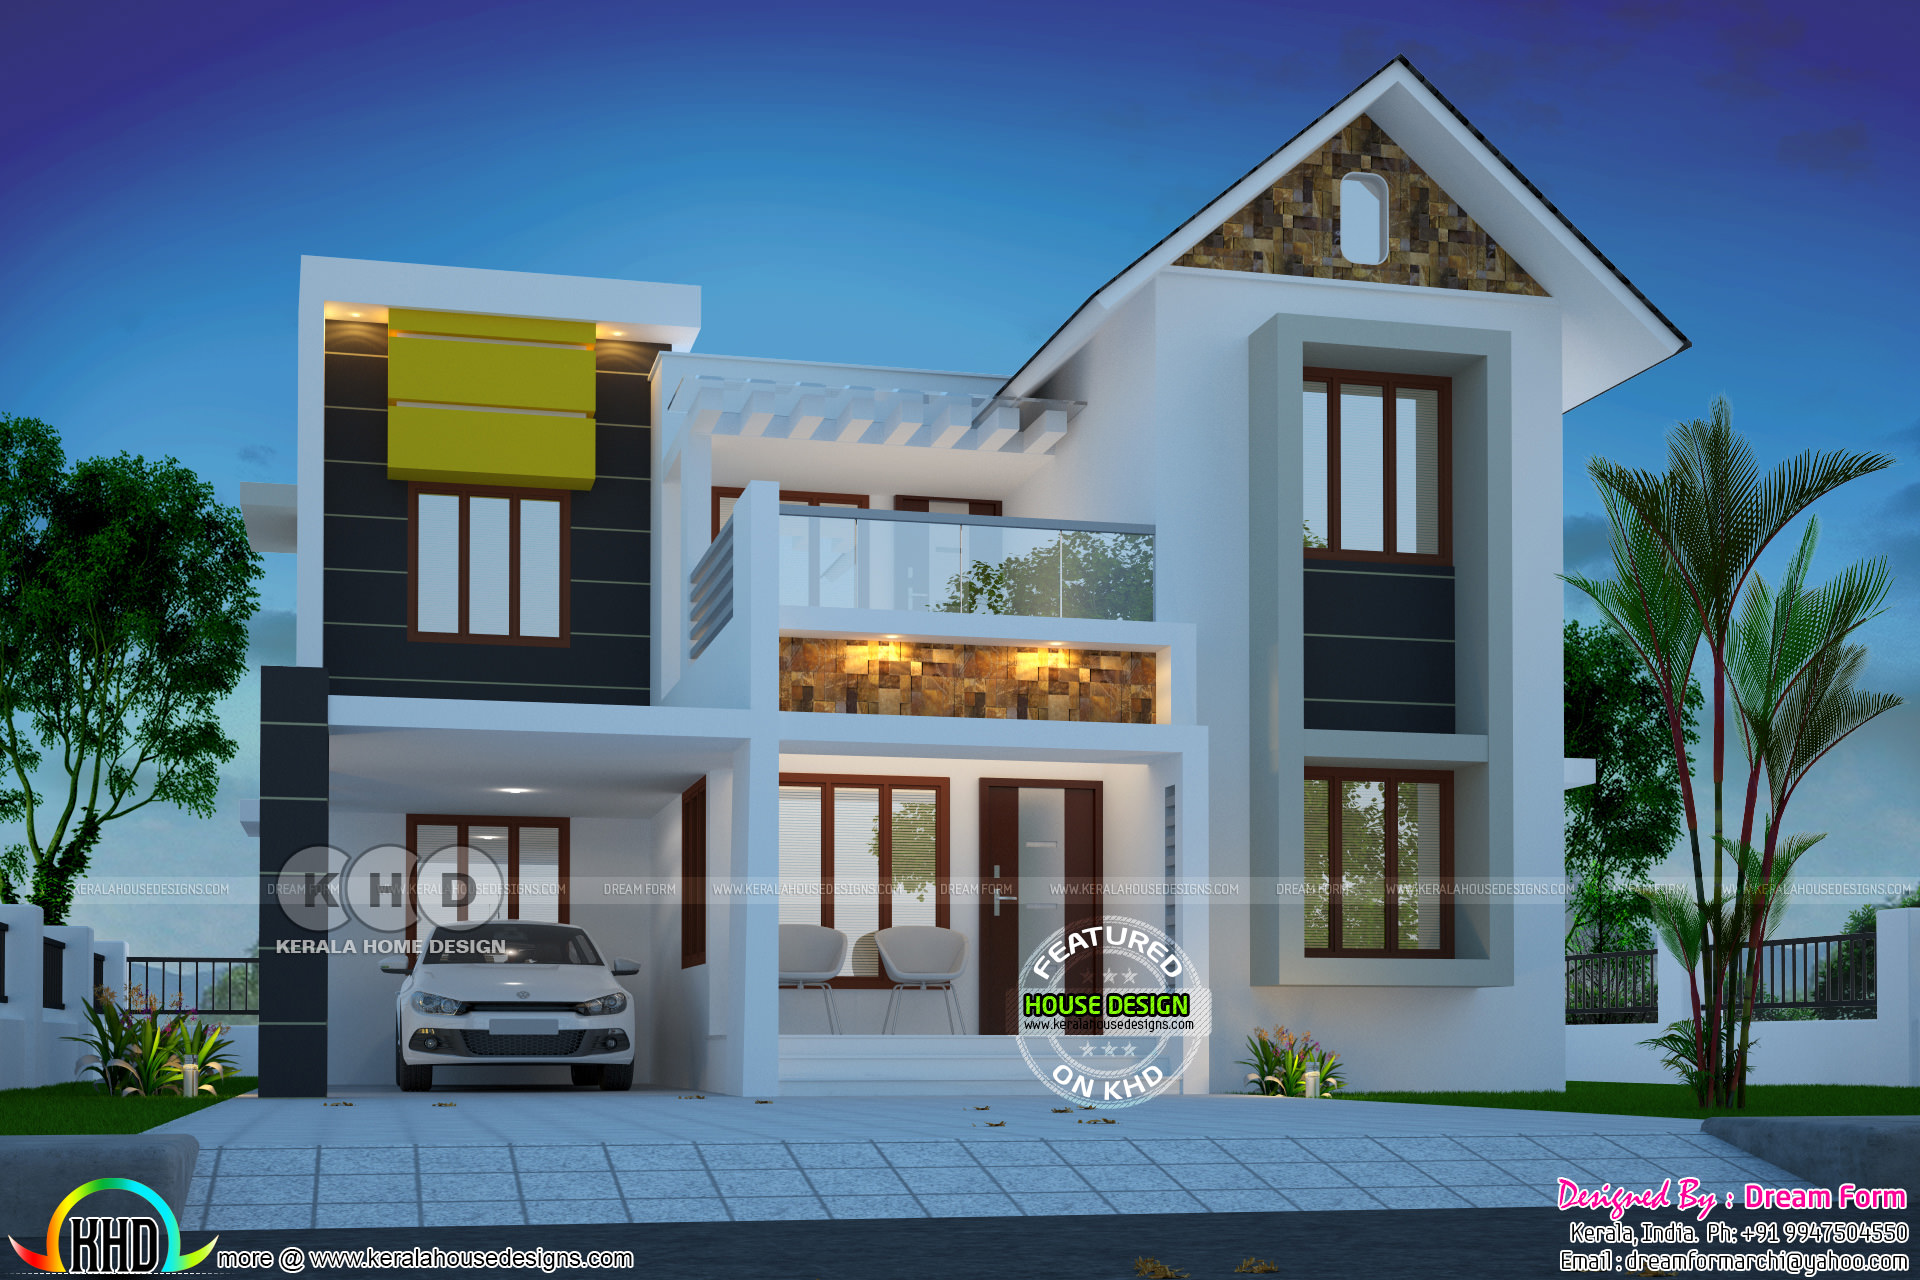 3 bedroom 1600  square  feet  mixed roof home  Kerala home  